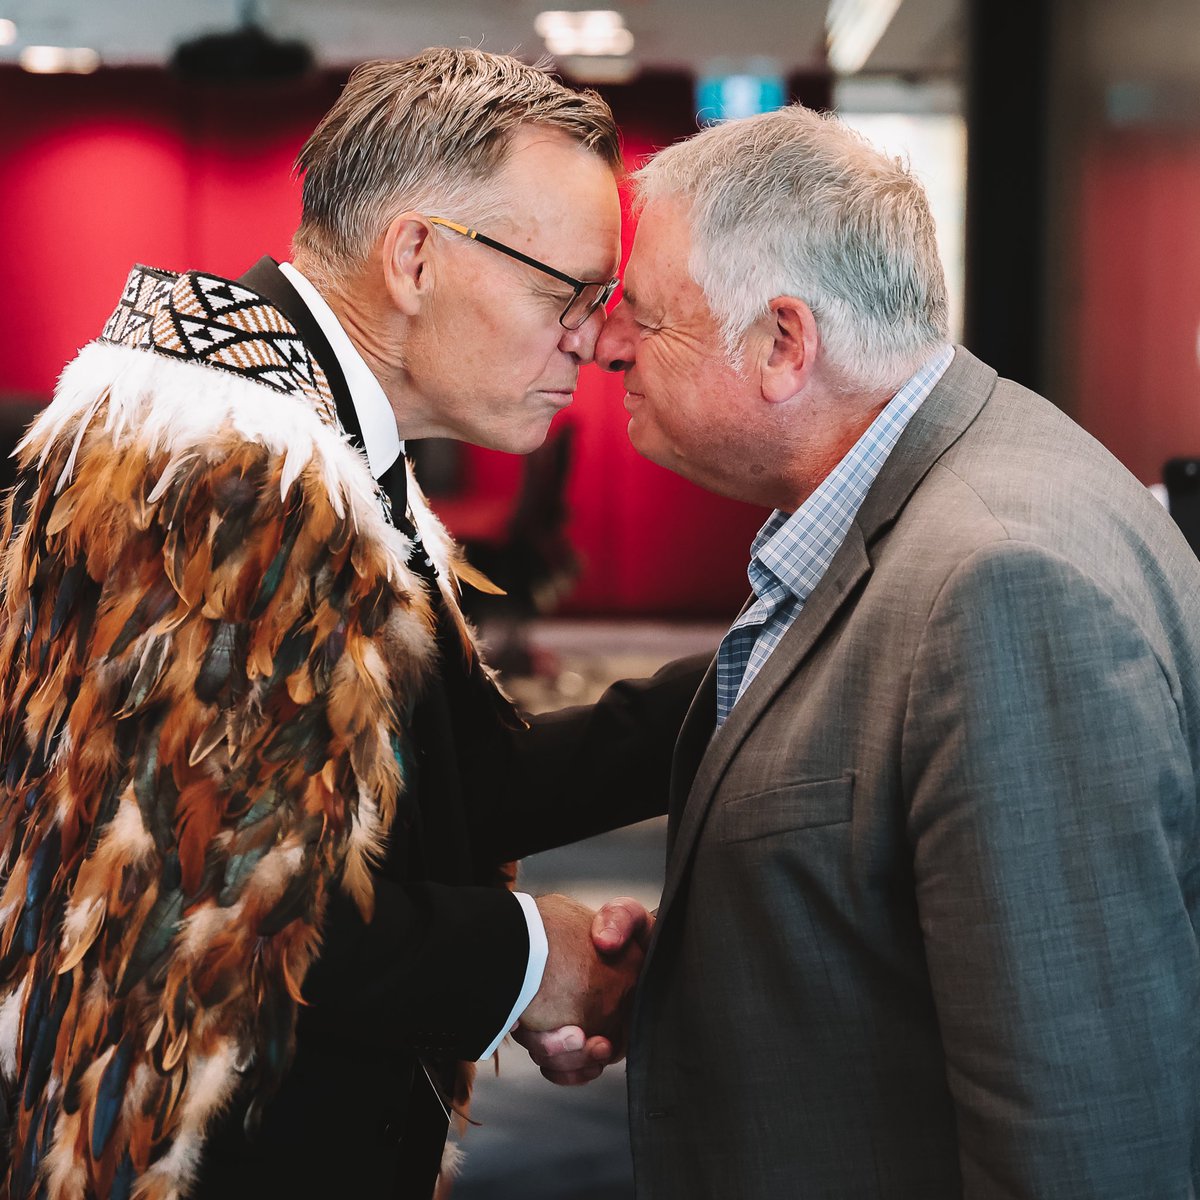 High Commissioner Needs was welcomed by staff delivering a mihi whakatau, a form of official Māori welcome, and was gifted a kākahu, a traditional Māori cloak, as a symbol of honour and respect.